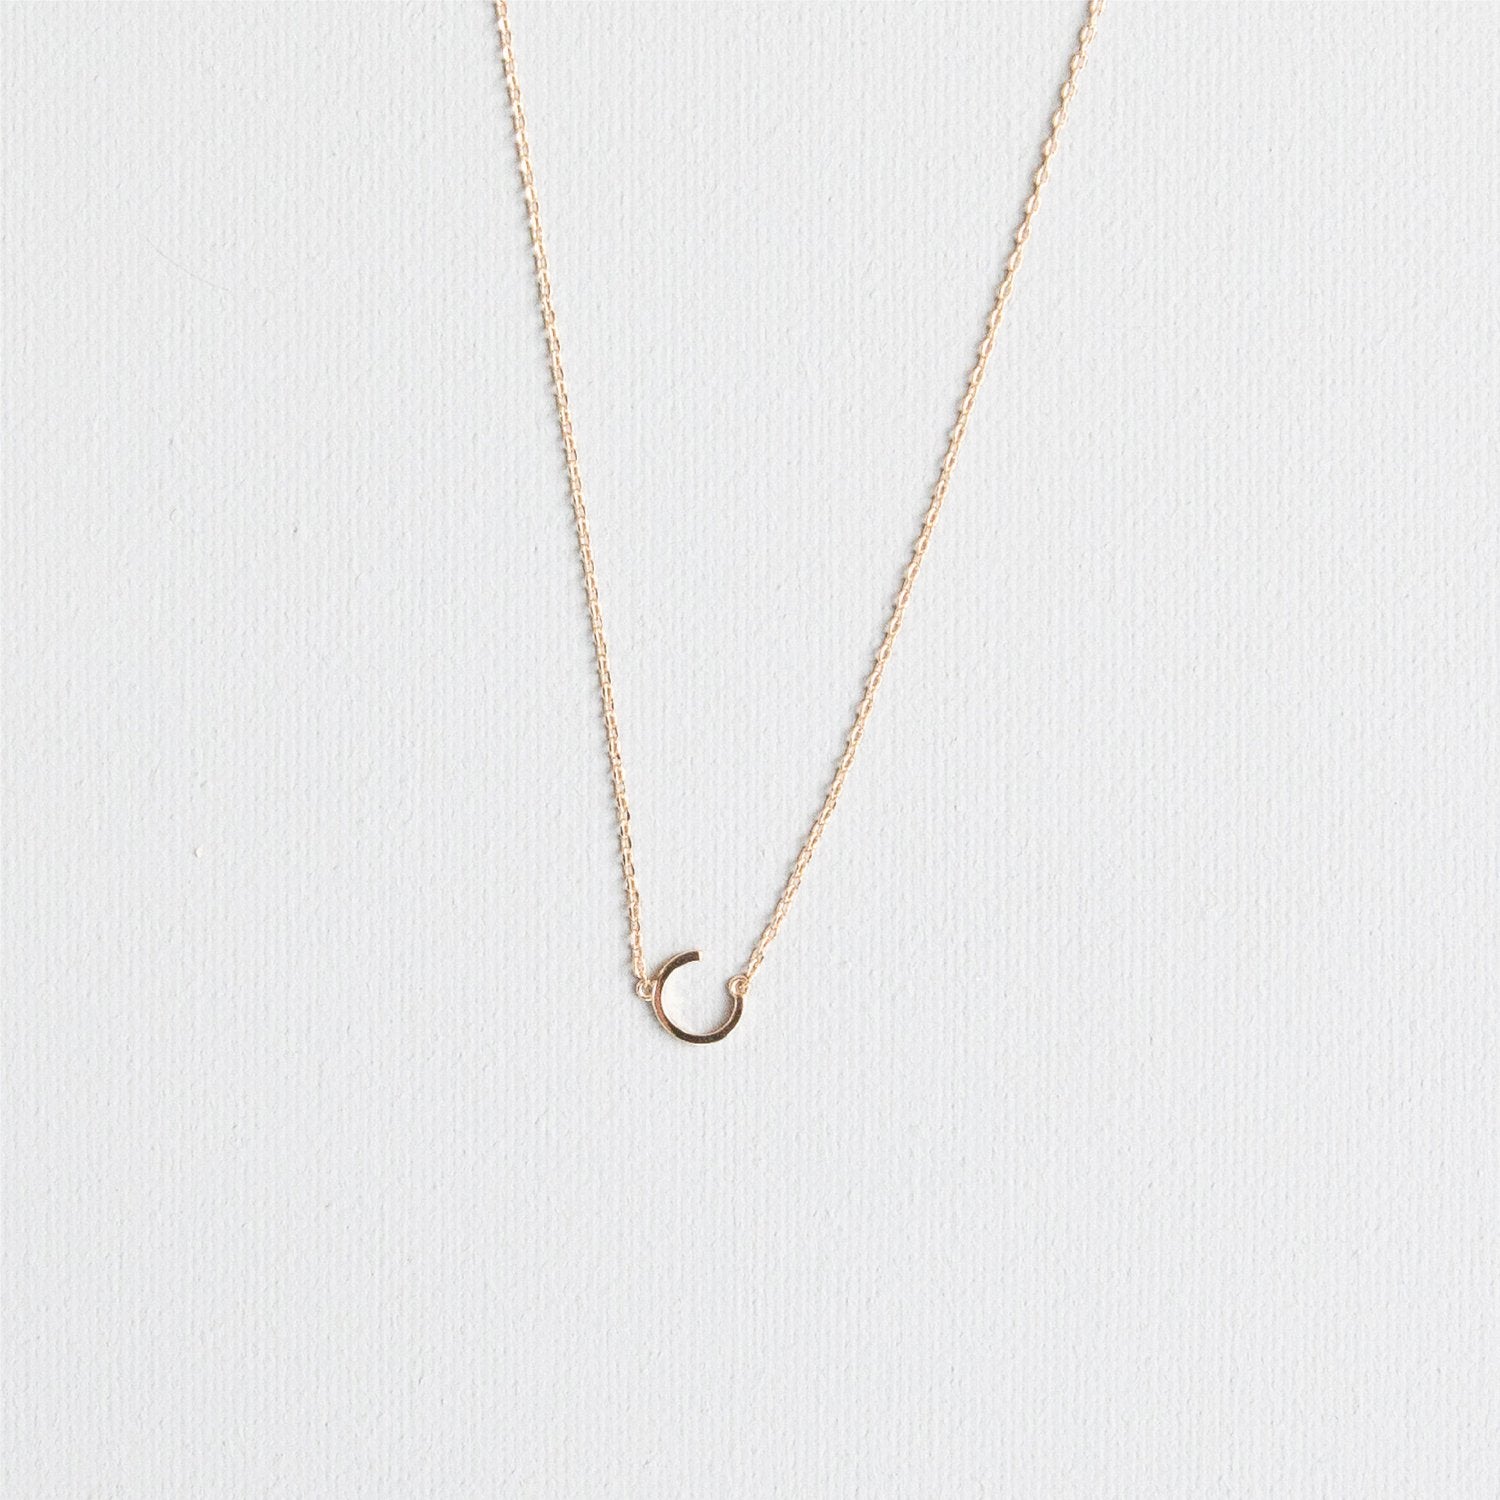 Gold Initial Necklace (FINAL SALE)